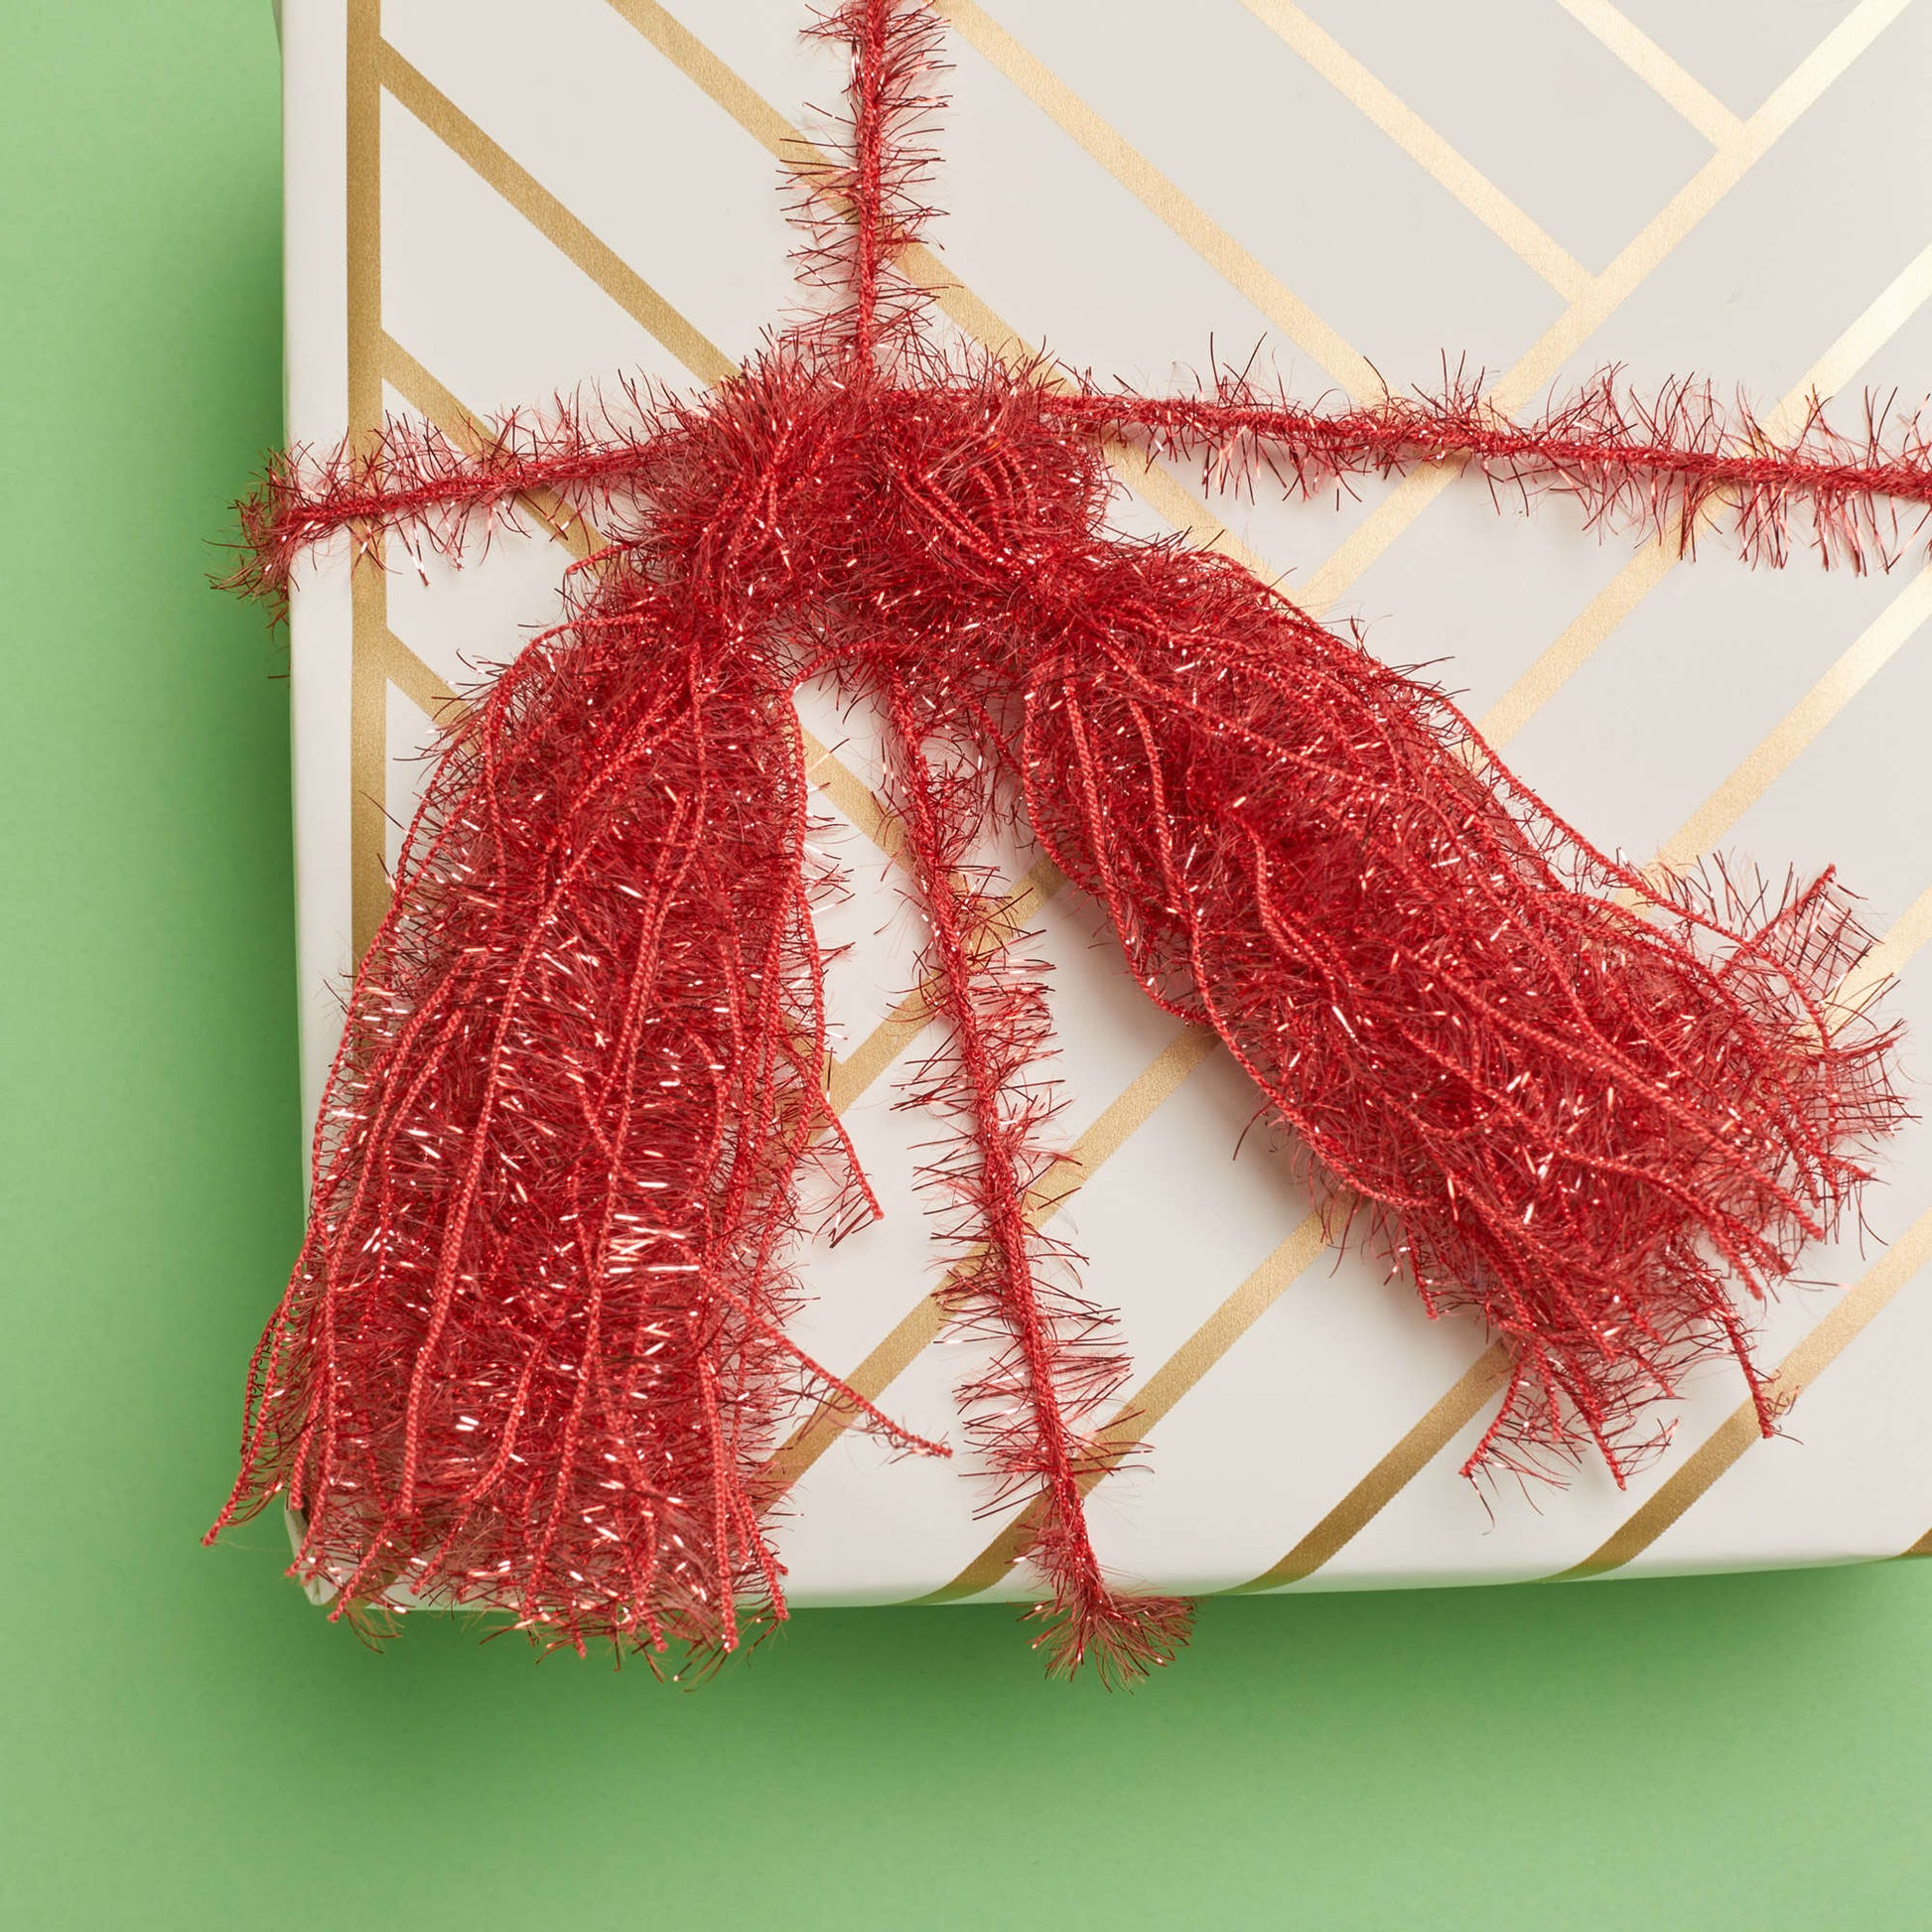 Free Red Heart Craft Tassels And Poms Gift Toppers Pattern